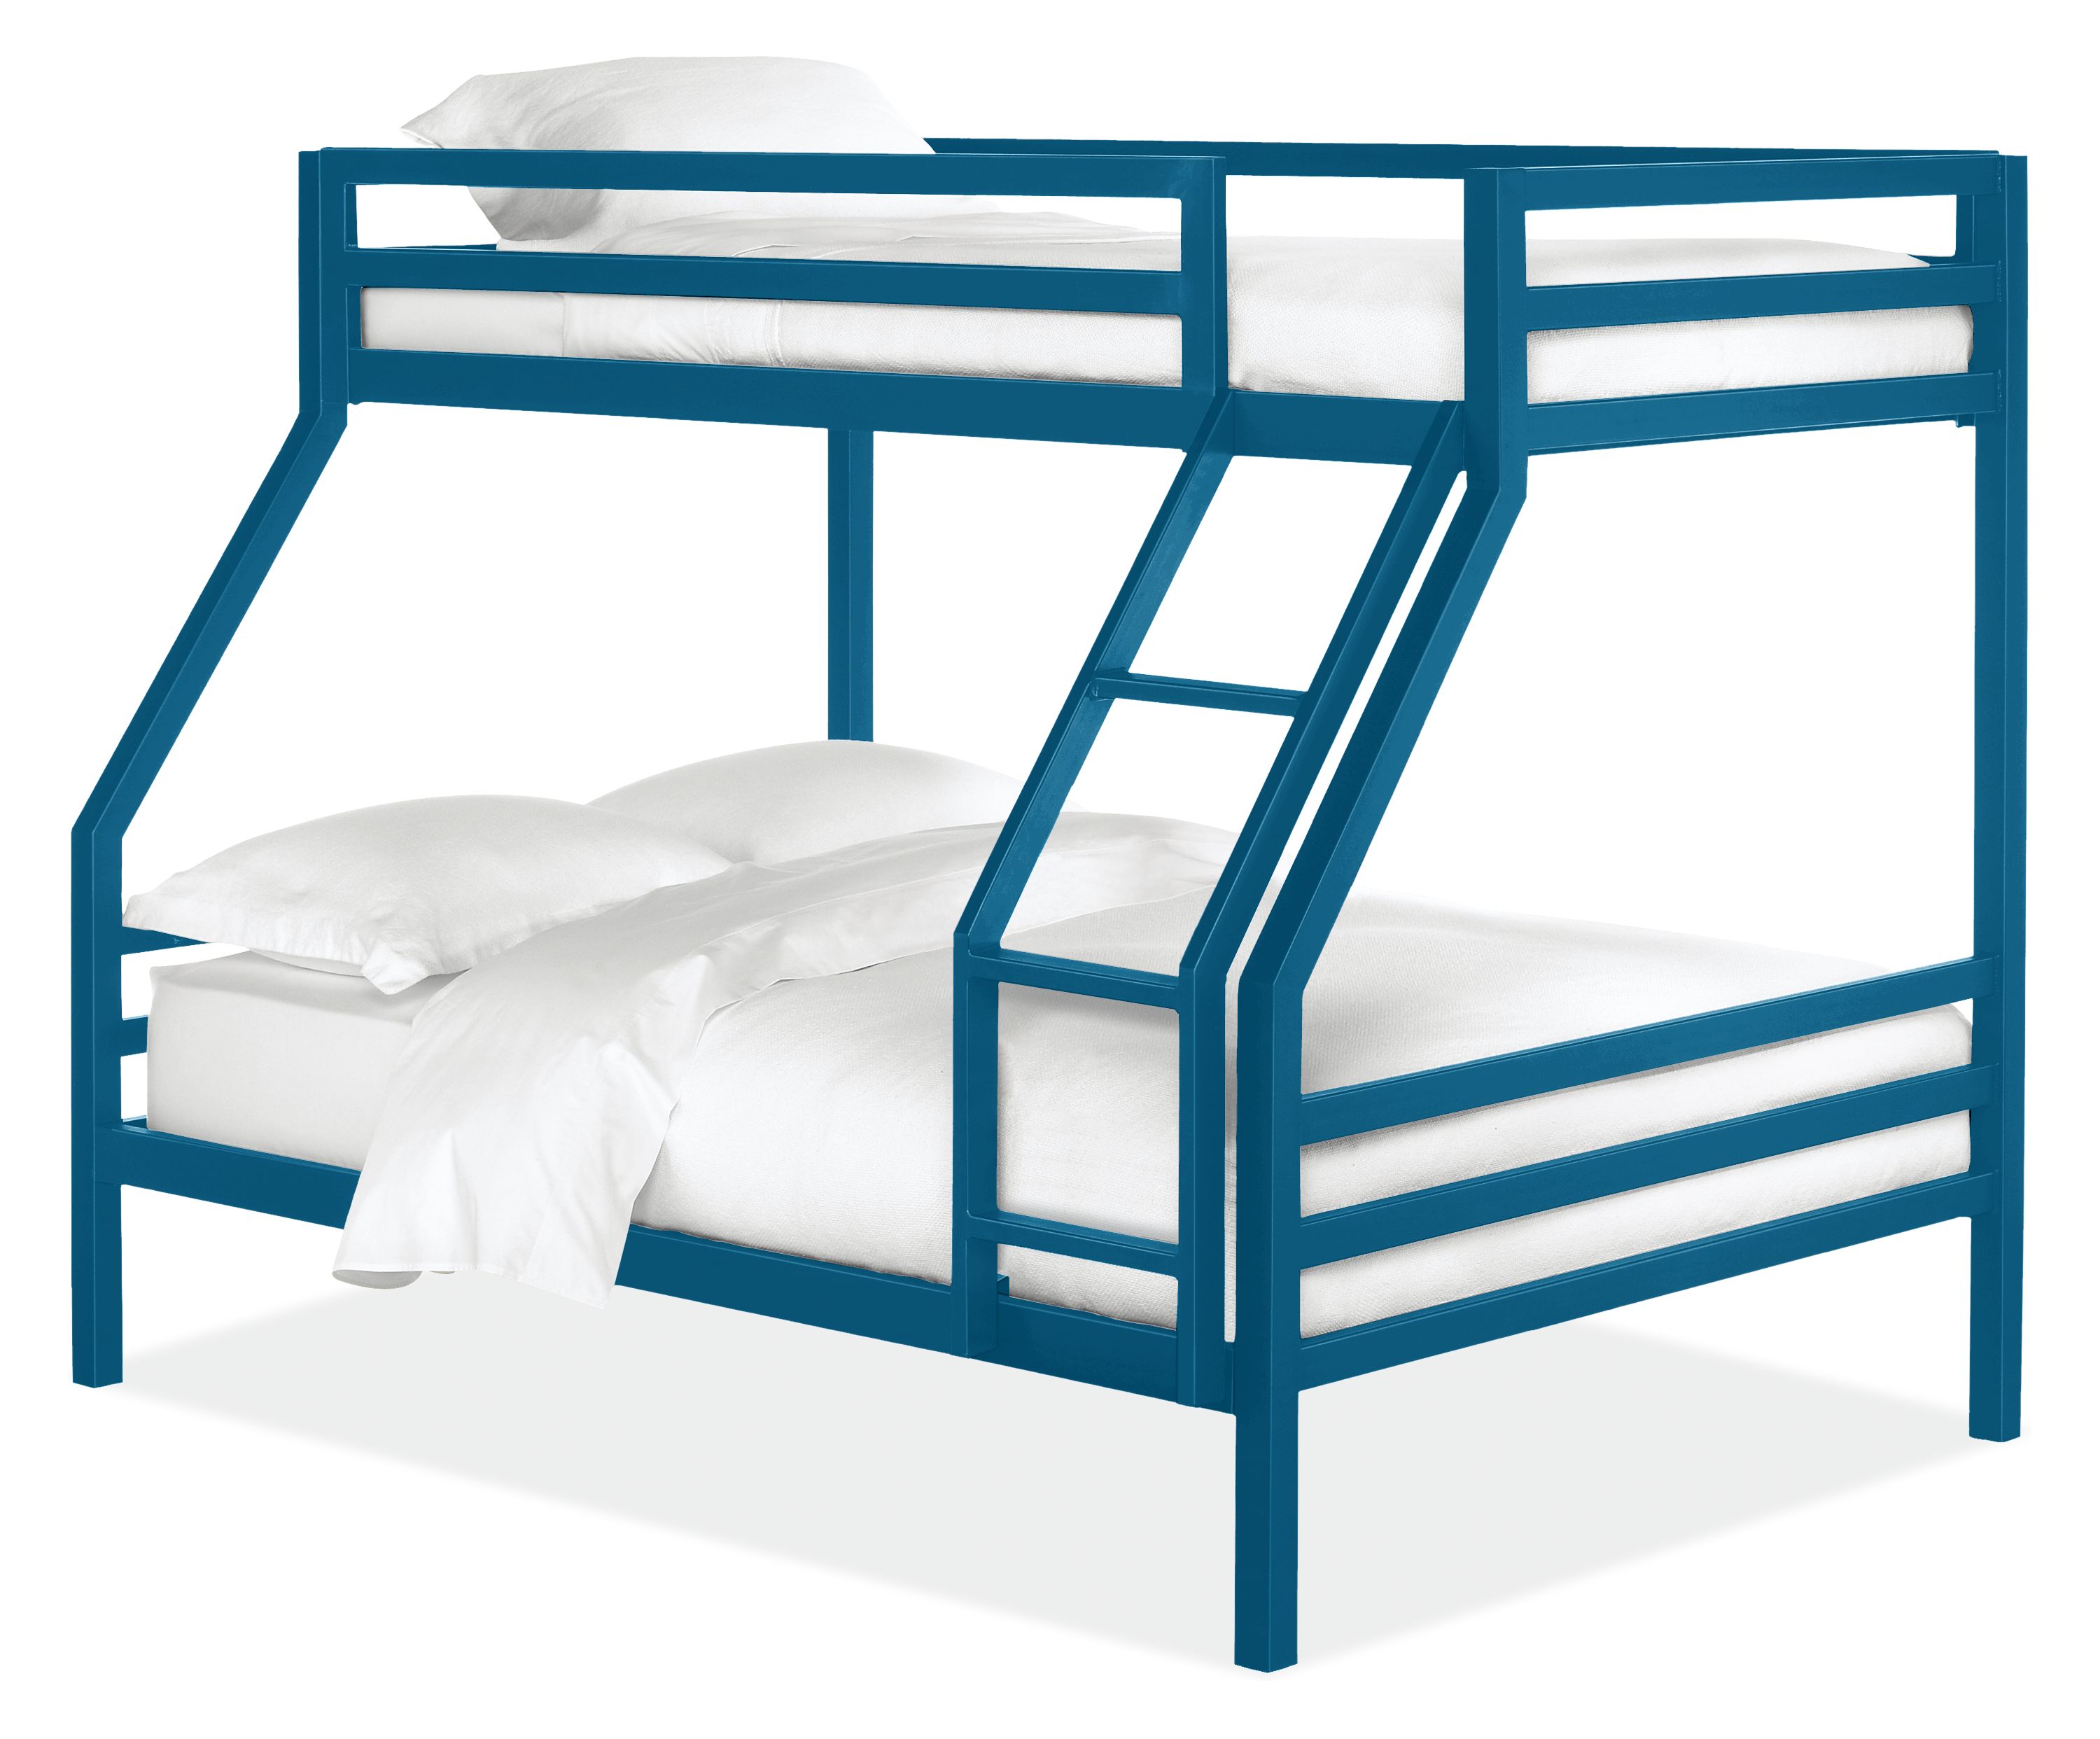 Fort Bunk Beds In Colors Twin Over, Bunk Bed Foundation Board